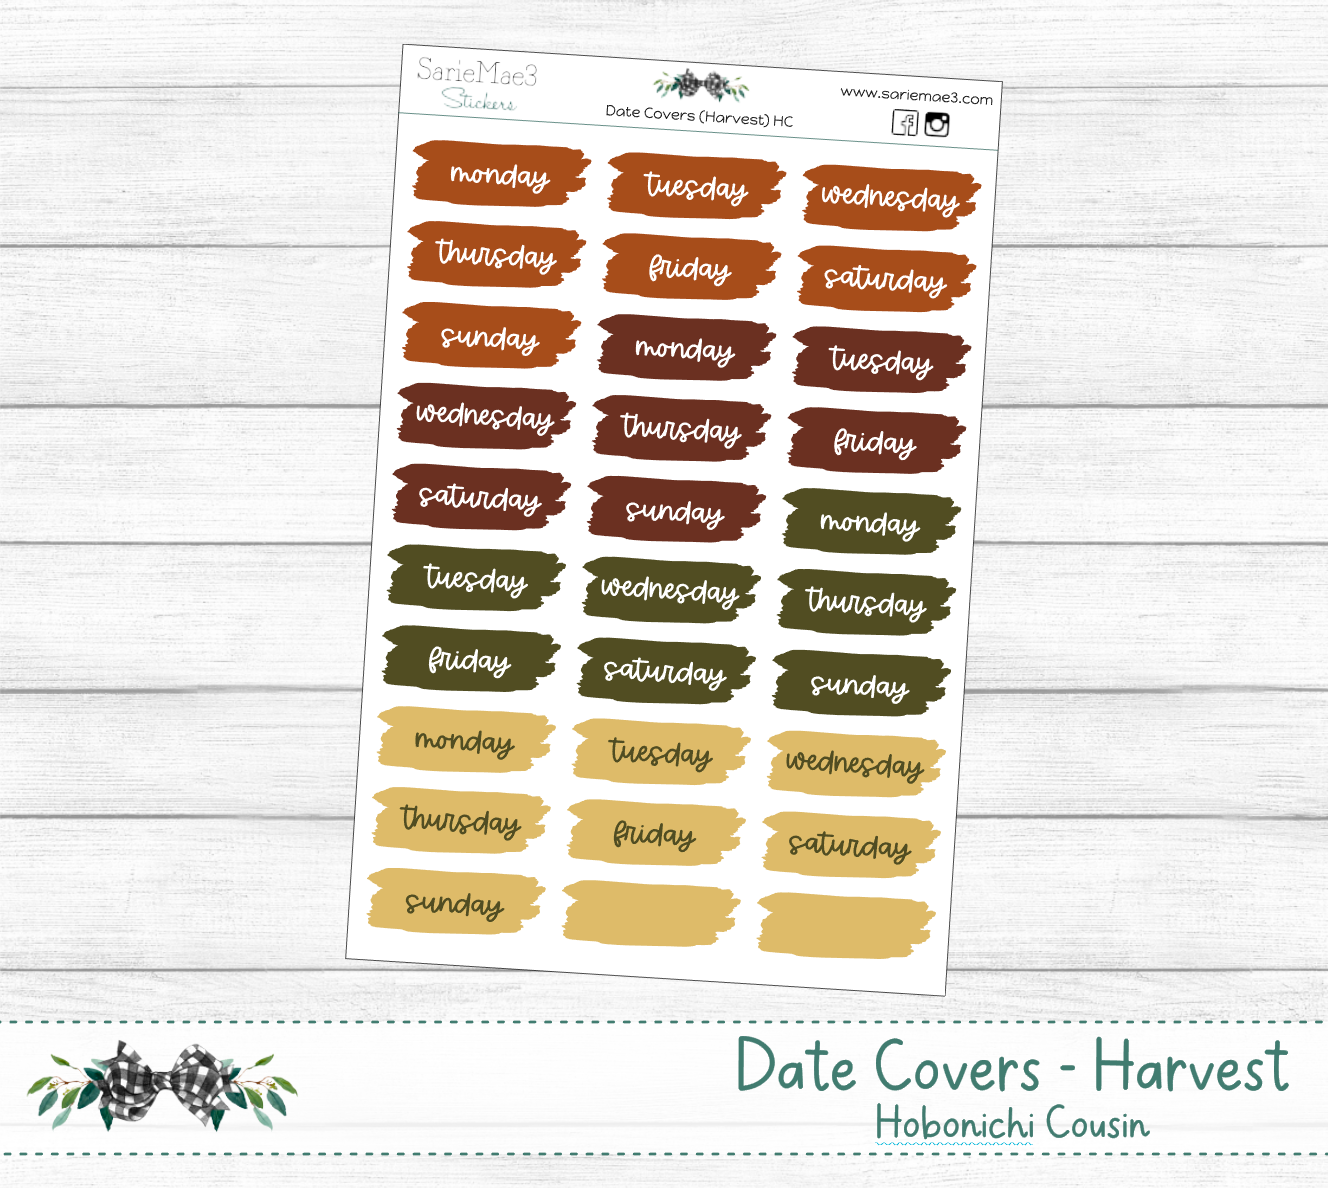 Date Covers (Harvest) Hobonichi Cousin